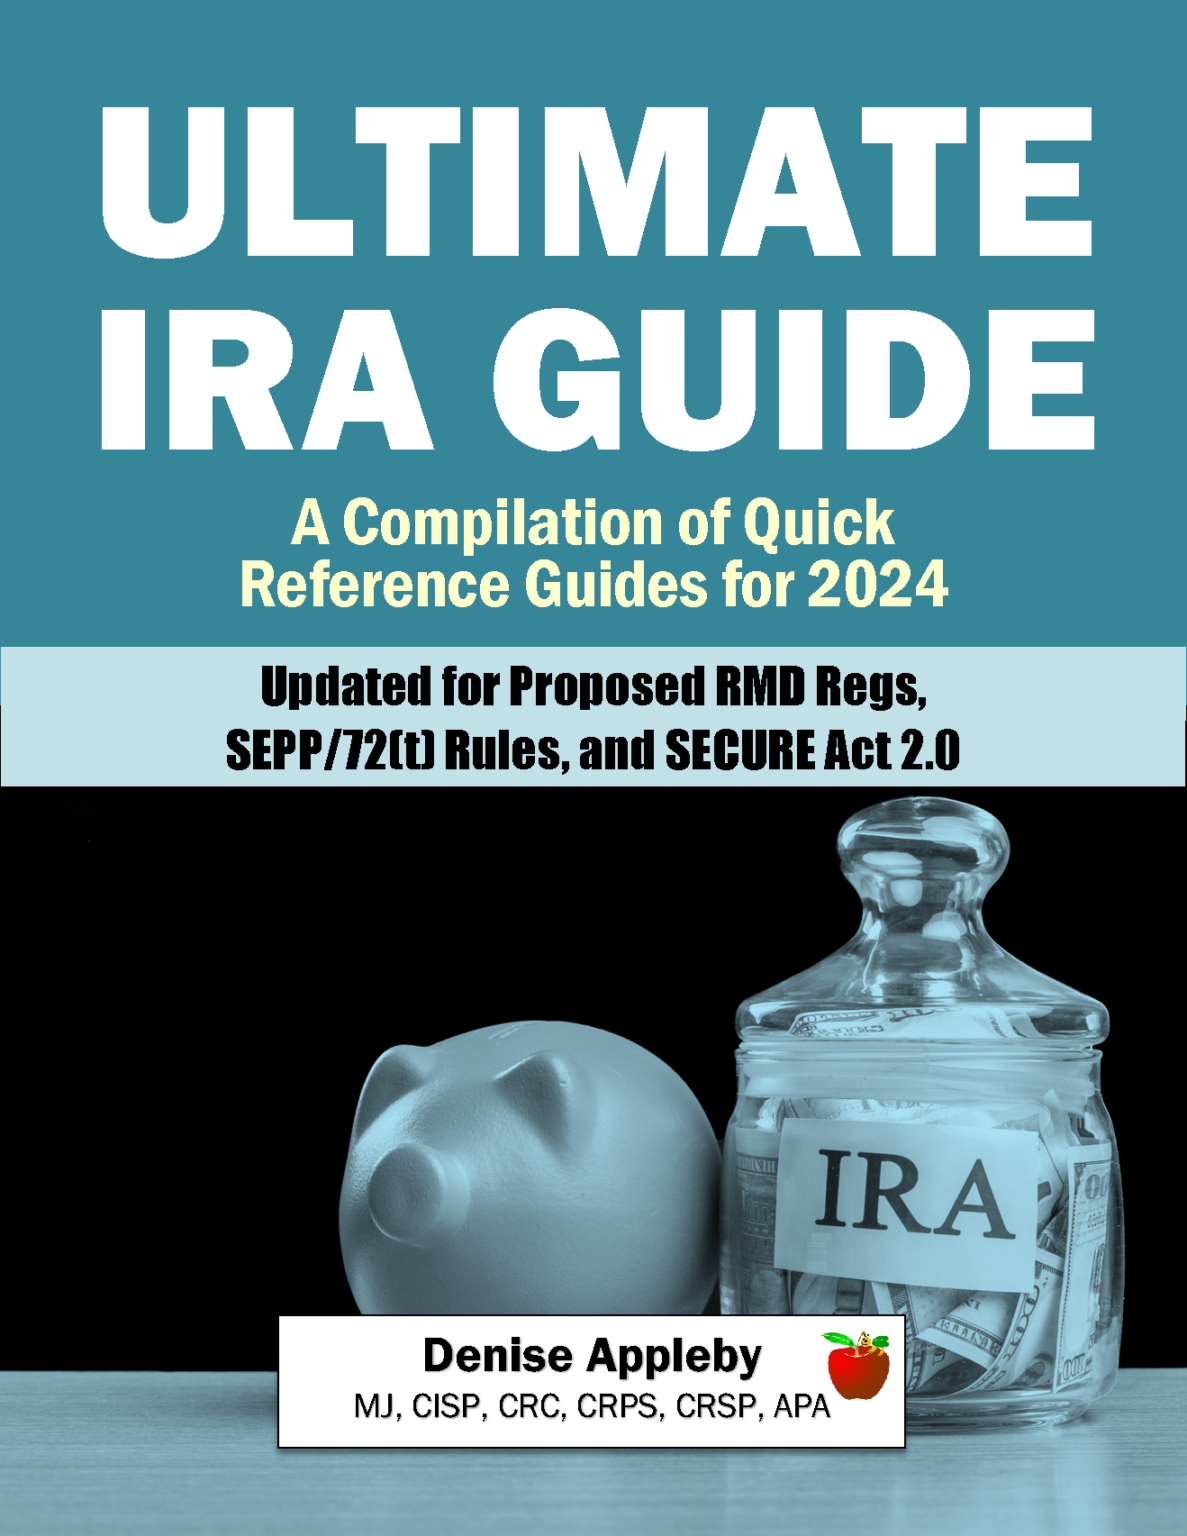 "The Ultimate IRA Guide A Compilation of IRA Reference Guides for 2024